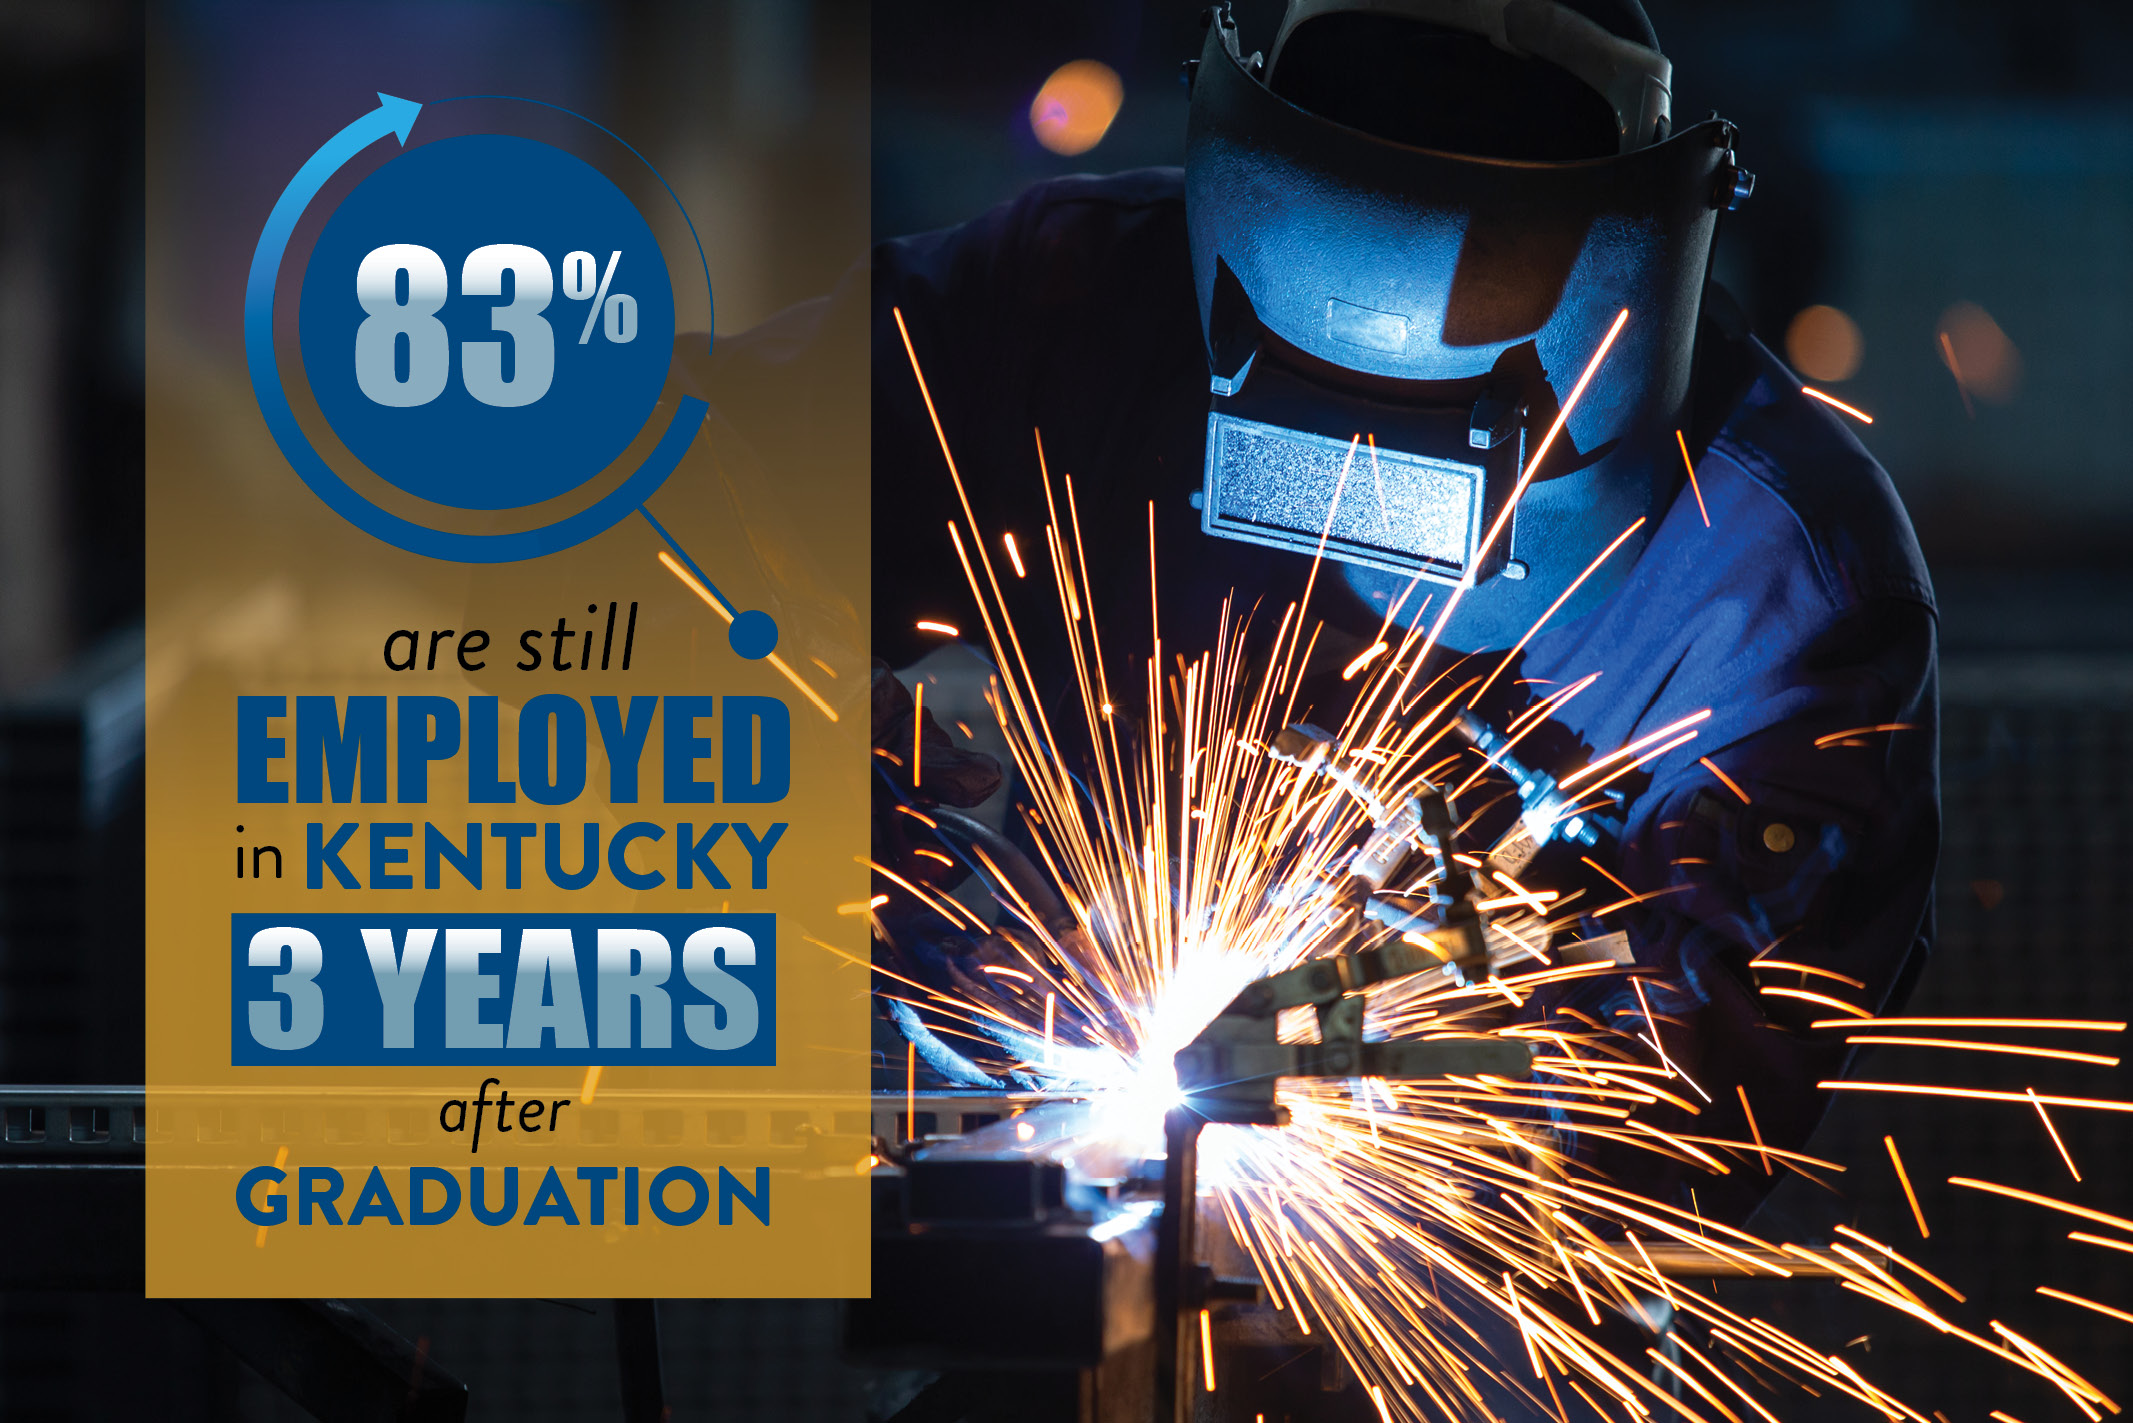 Welding Student, 83% of SKYCTC students are still employed in Kentucky 3 years after graduation.